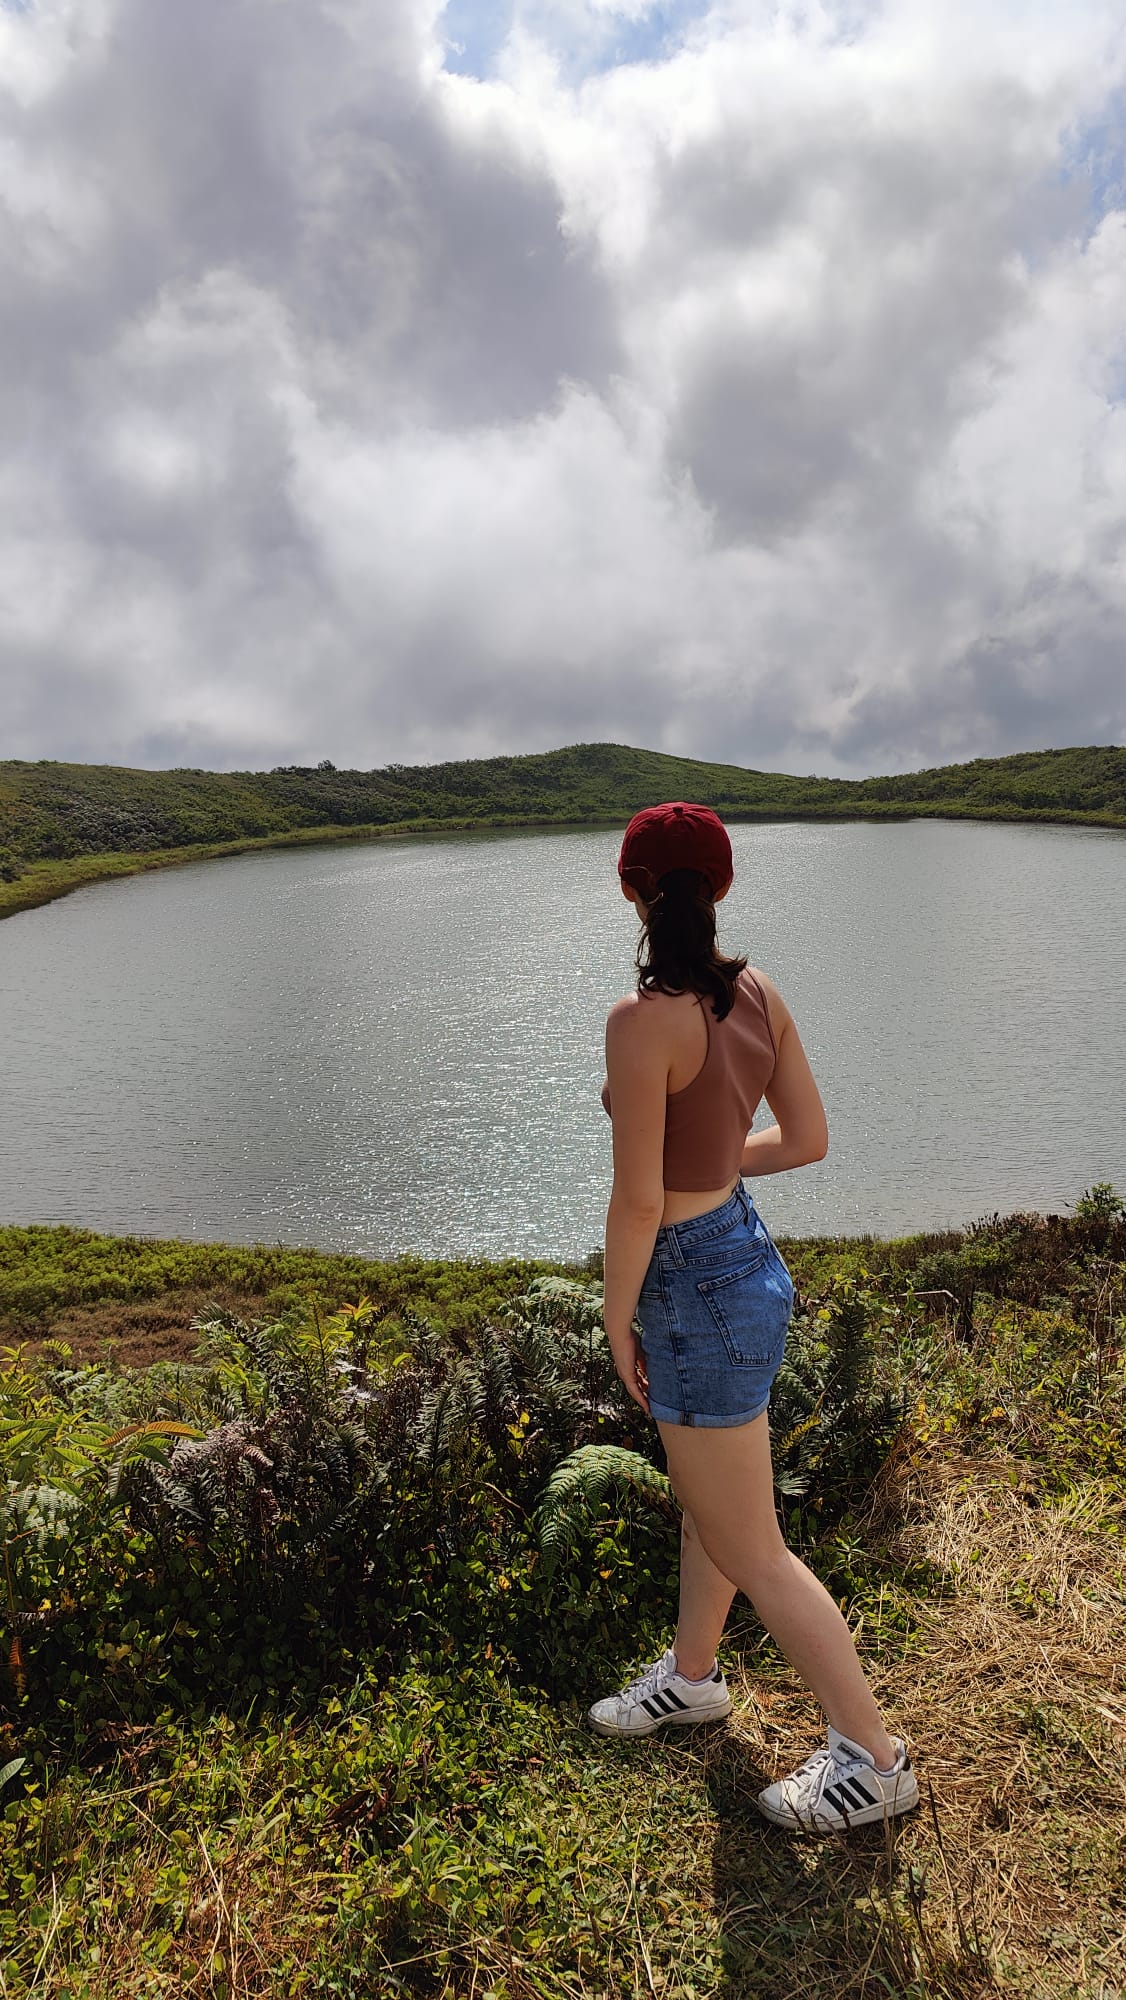 Pictured is me looking at El Junco, which is the fresh-water lake. The lake itself is a grey color, but with a cloudy sky above it. 